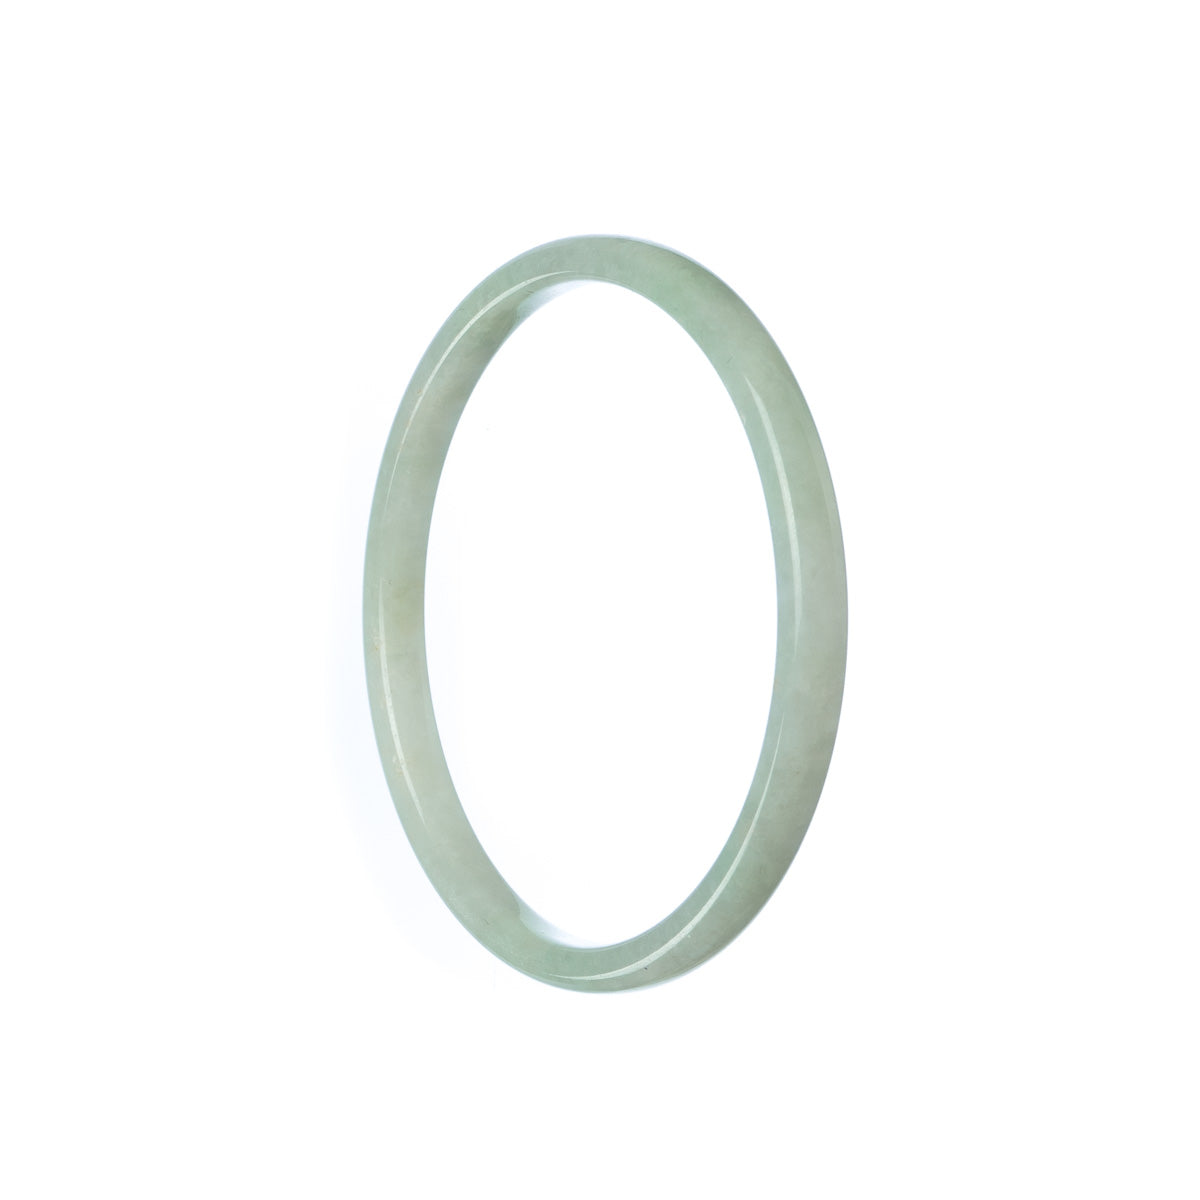 A close-up photo of a thin pale green jadeite bangle bracelet, measuring 52mm in diameter. The jadeite stone has a natural, certified quality, and the bracelet is designed by MAYS™.